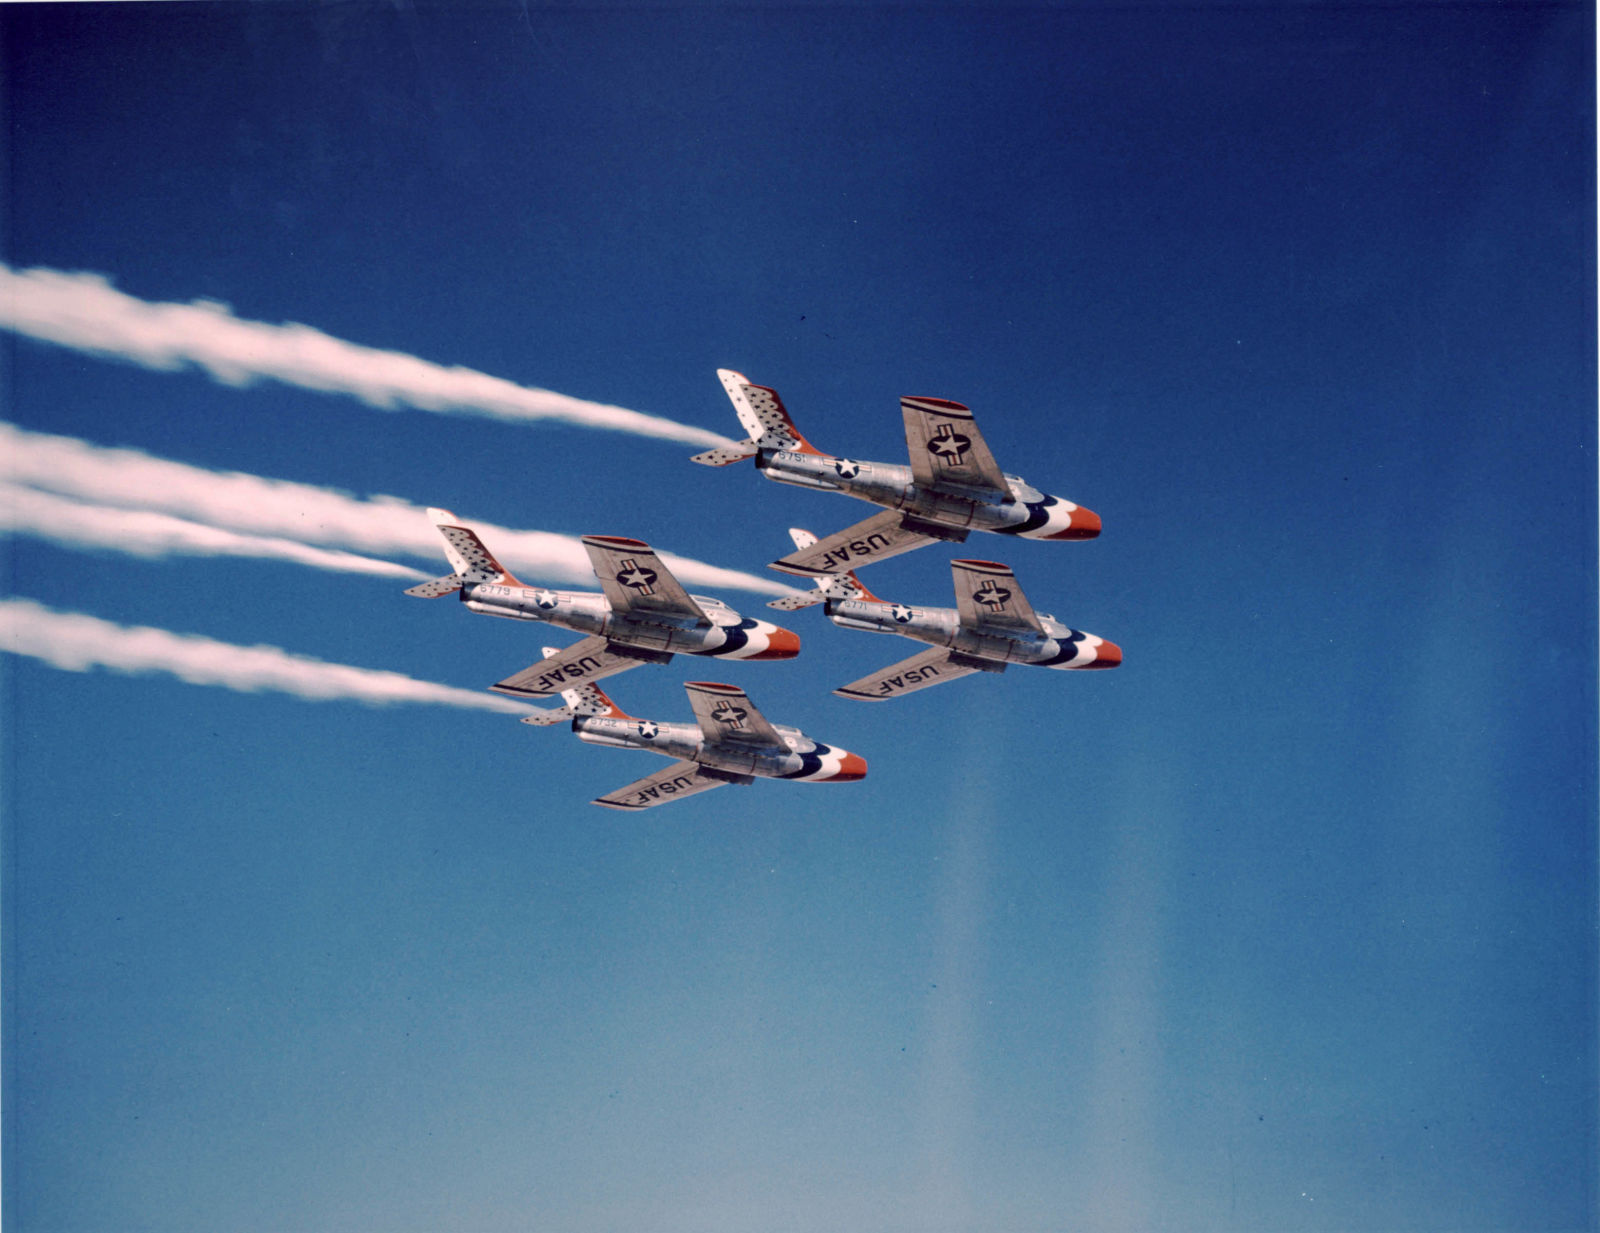 The team switched to the Republic F-84F Thunderstreak in 1955